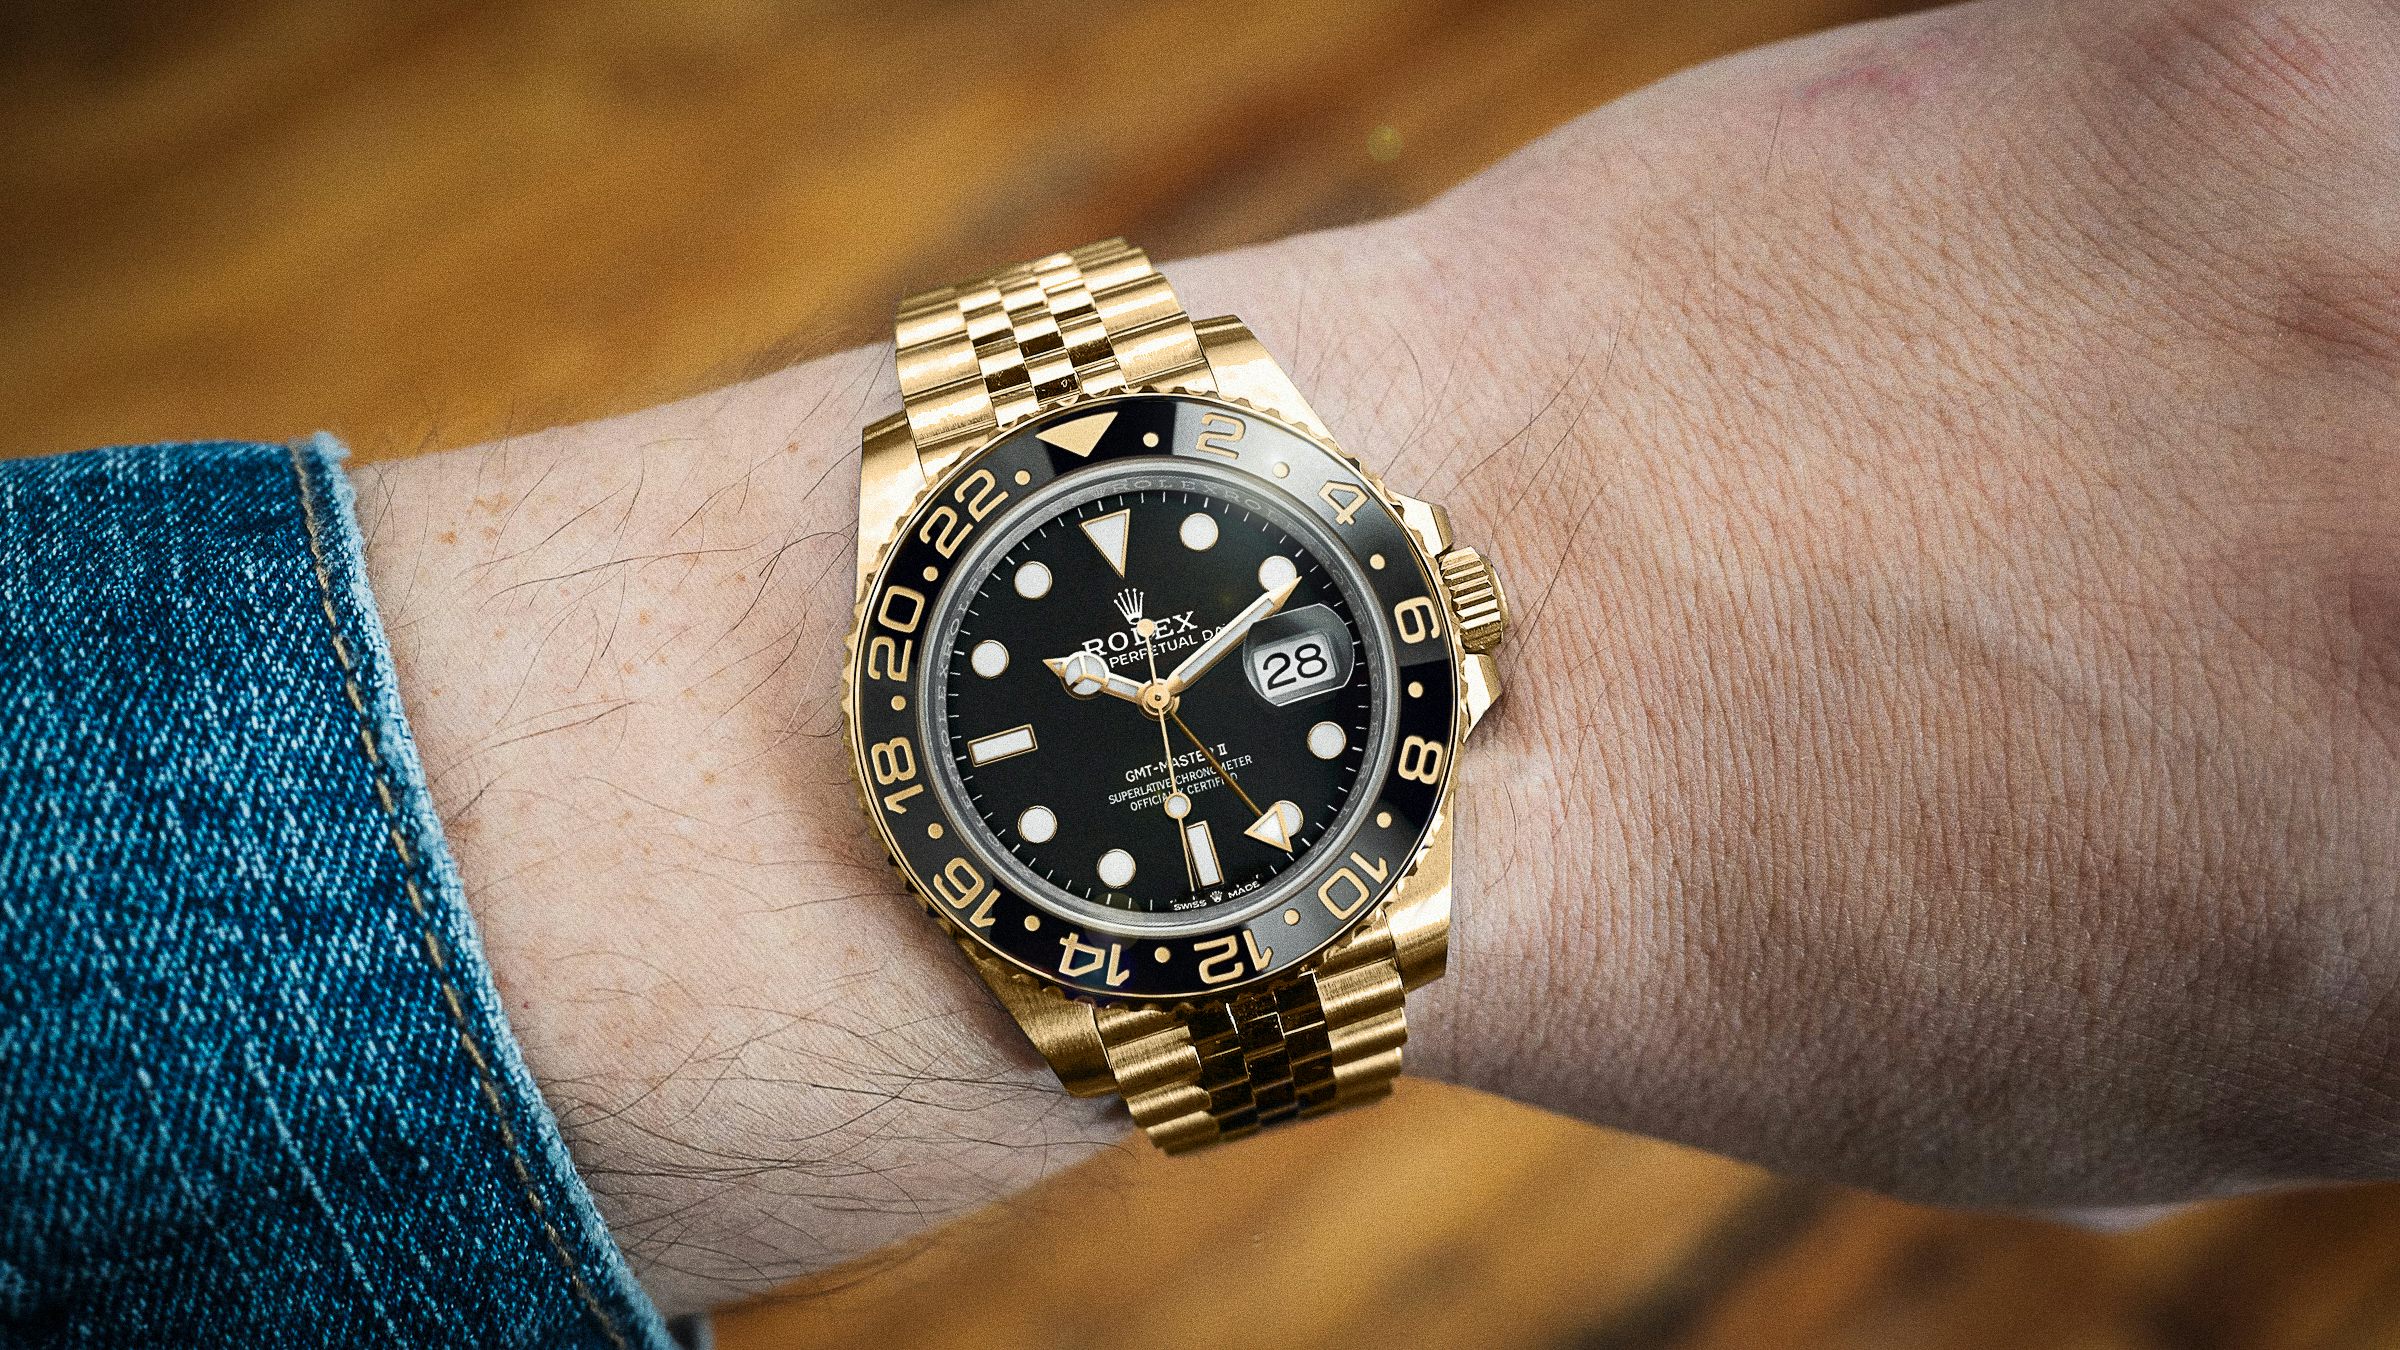 Hodinkee's 2023 Rolex Predictions For Watches &